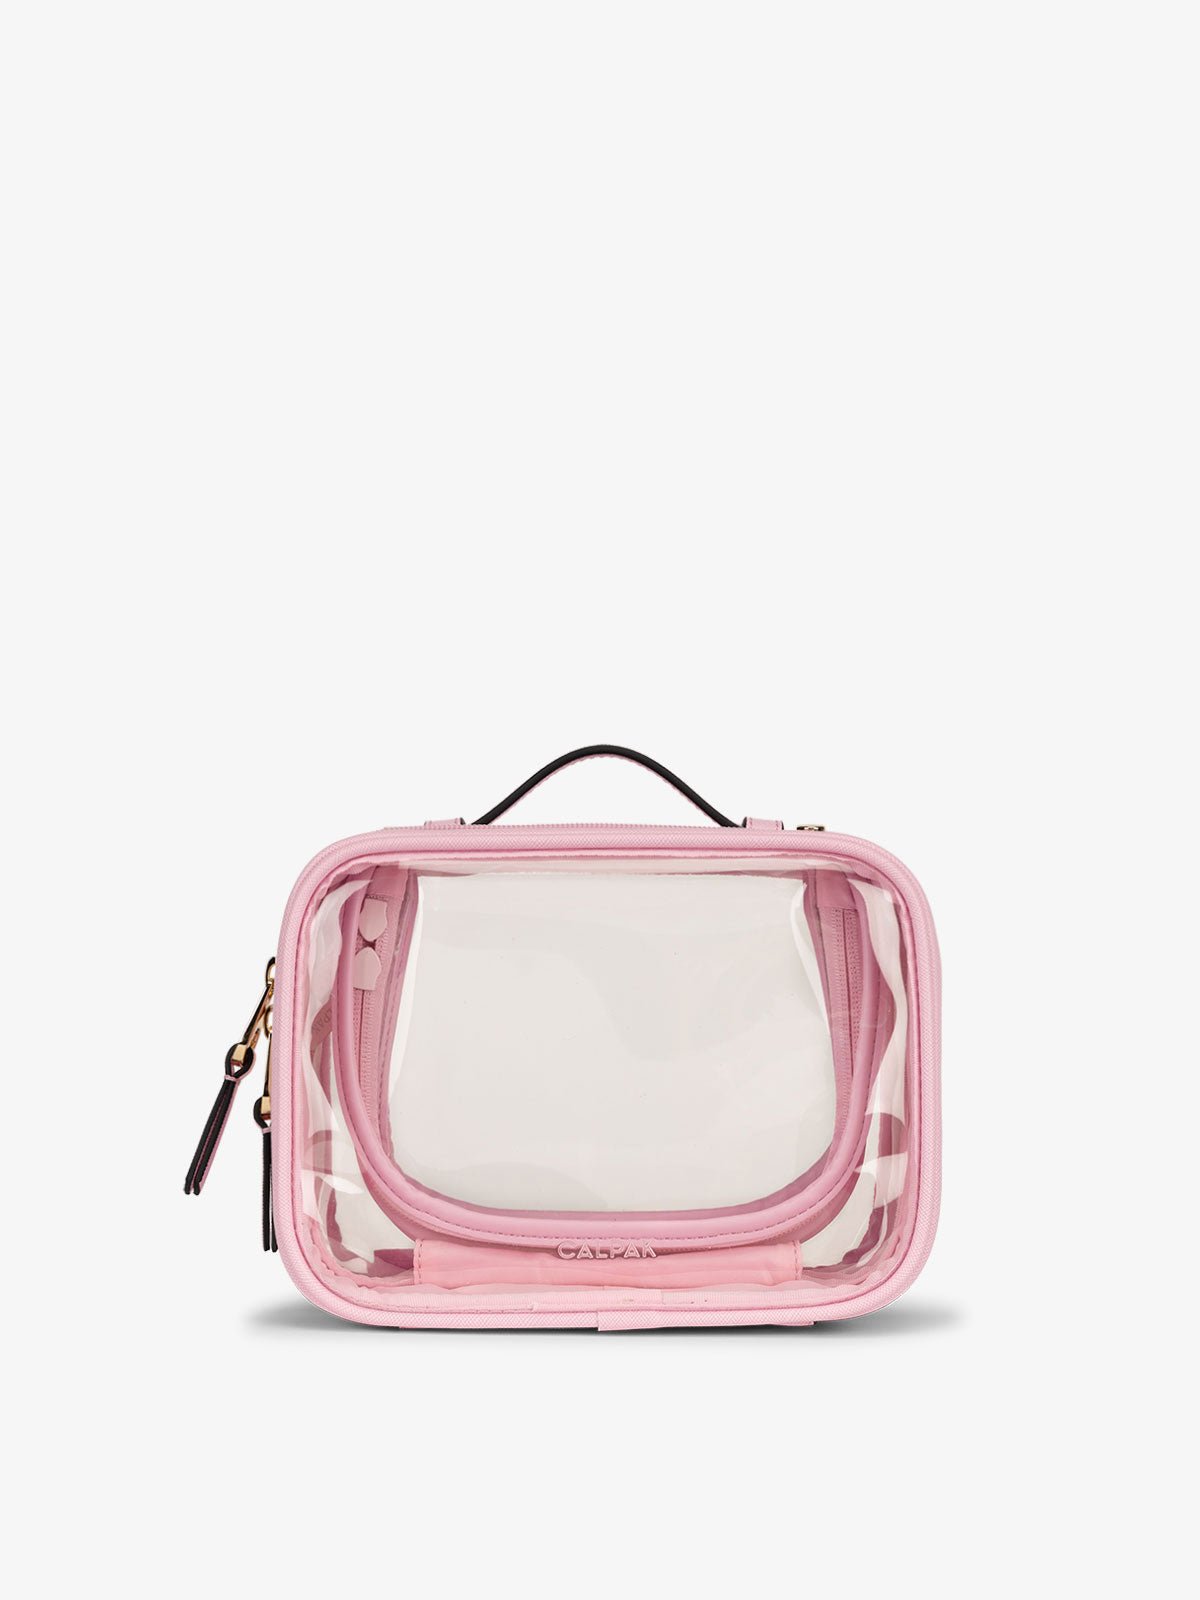 CALPAK small clear makeup bag with zippered compartments in pink strawberry